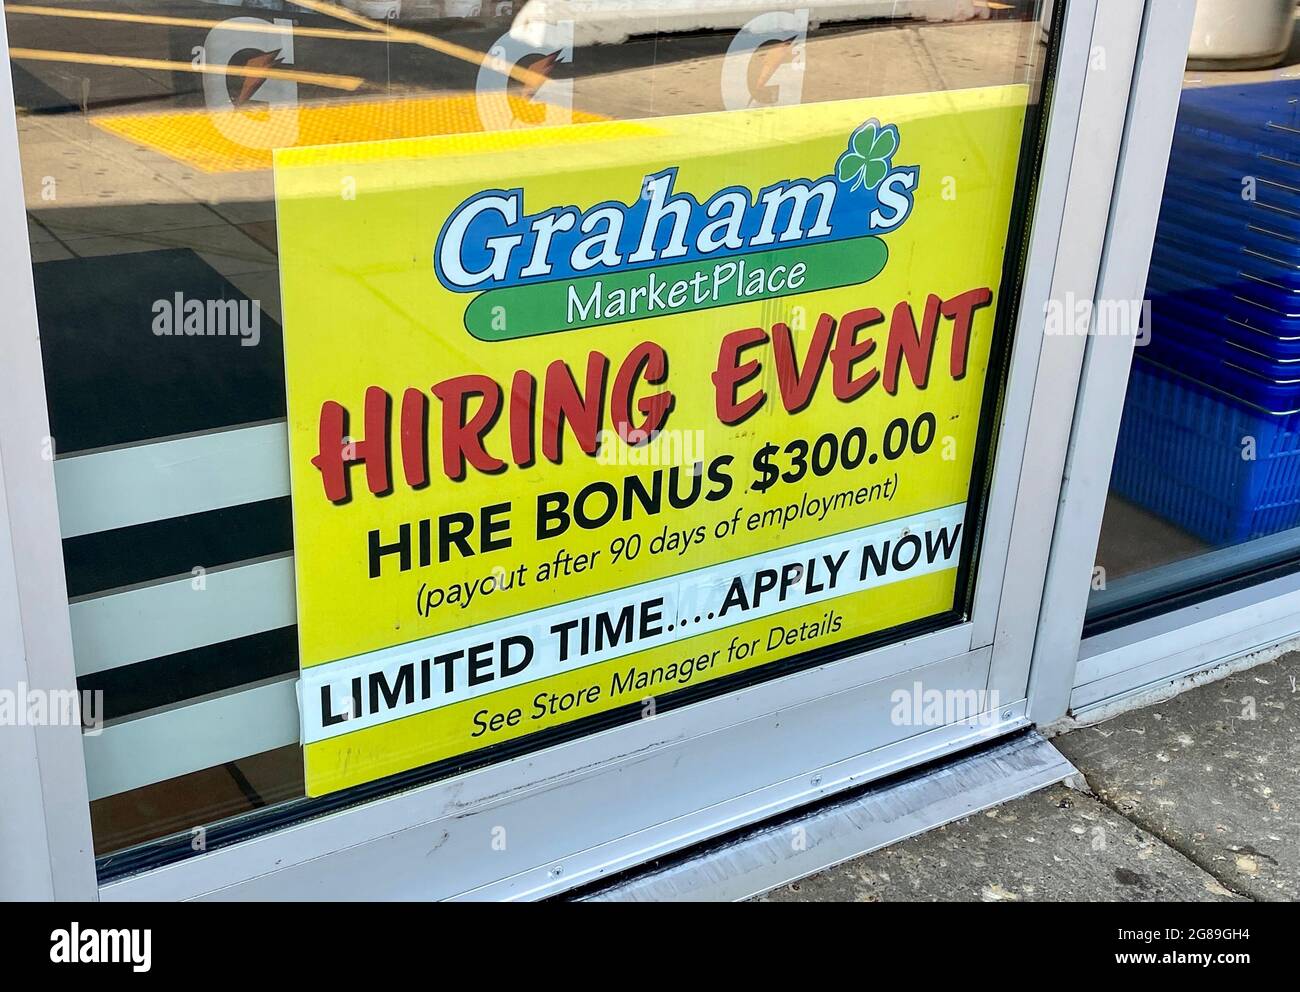 Sign at Graham's Marketplace promotes a hiring event with hire bonus. Businesses are struggling to find personnel as the pandemic eases. Stock Photo